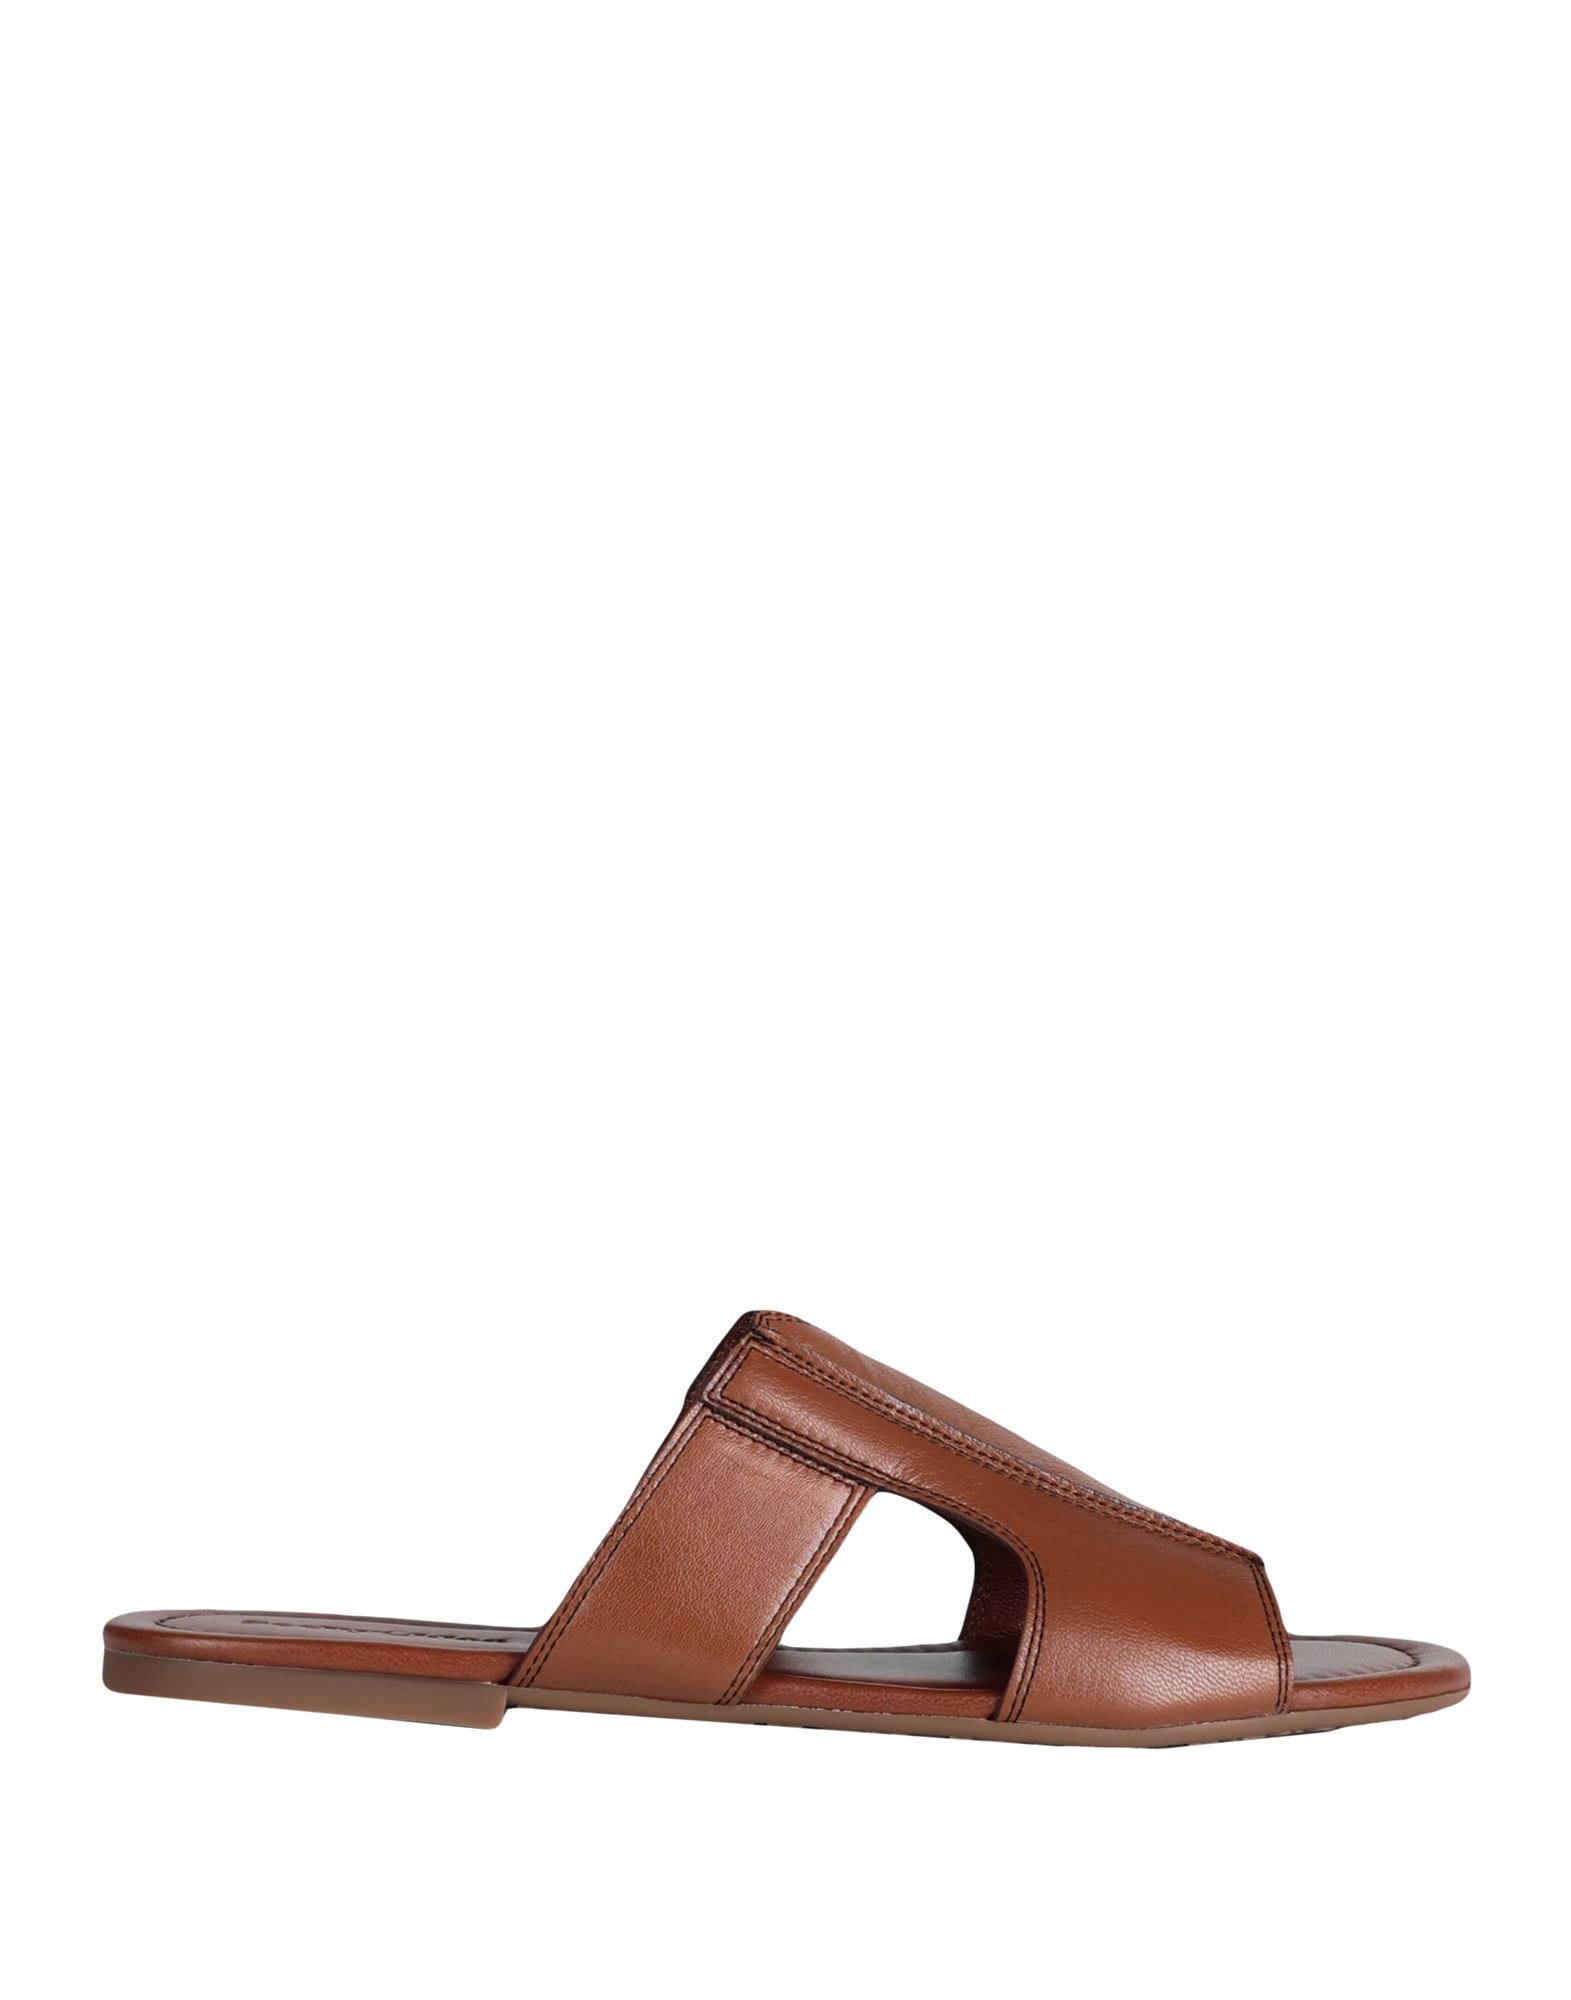 See By Chloé Woman Sandals Brown Size 6 Goat Skin